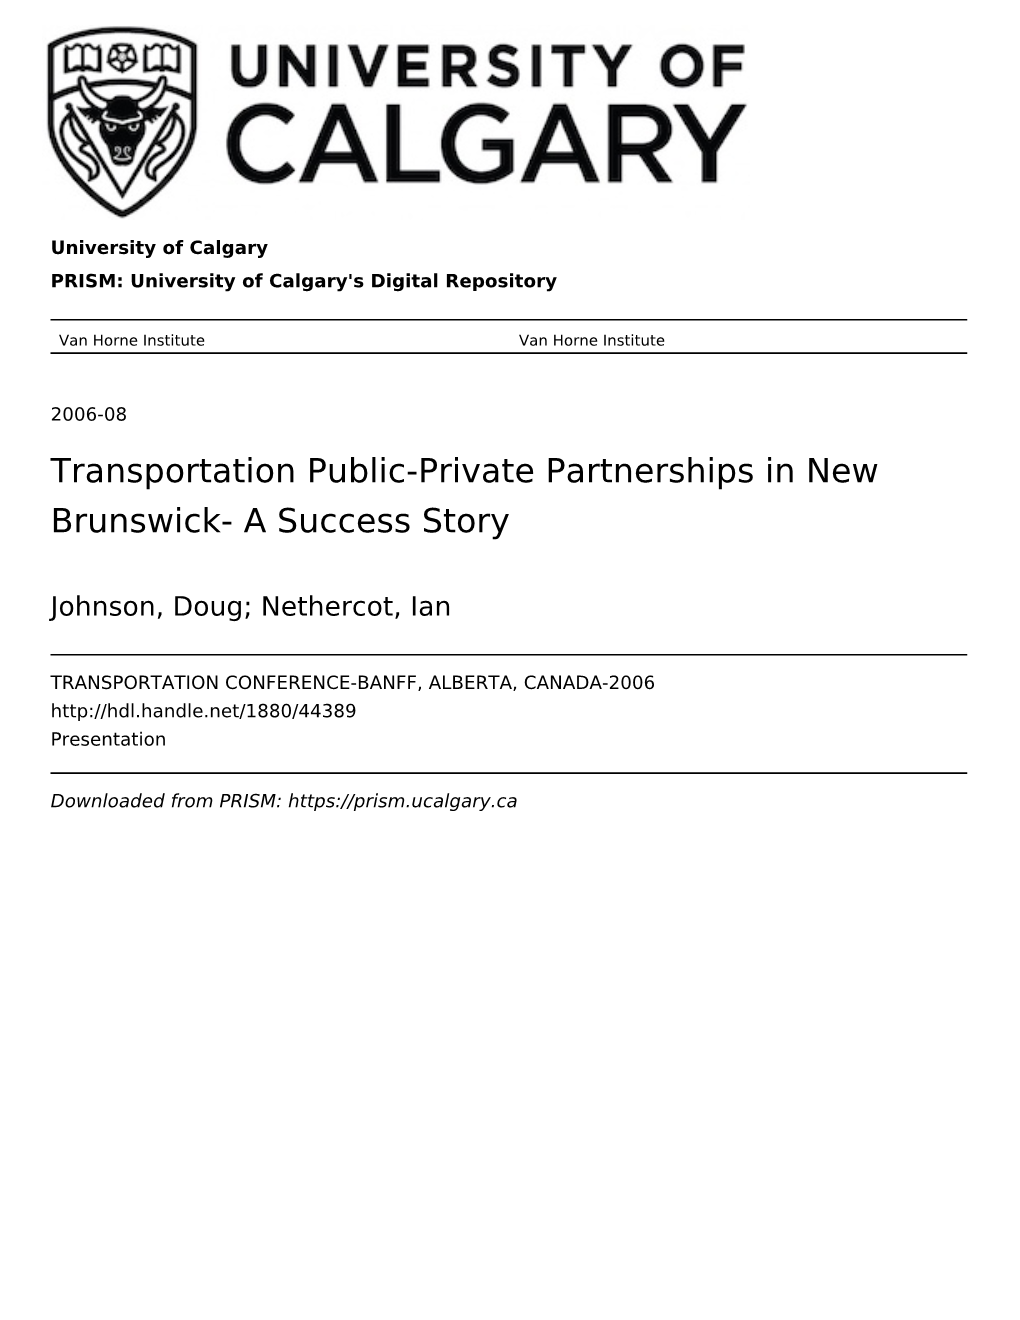 Transportation Public-Private Partnerships in New Brunswick- a Success Story